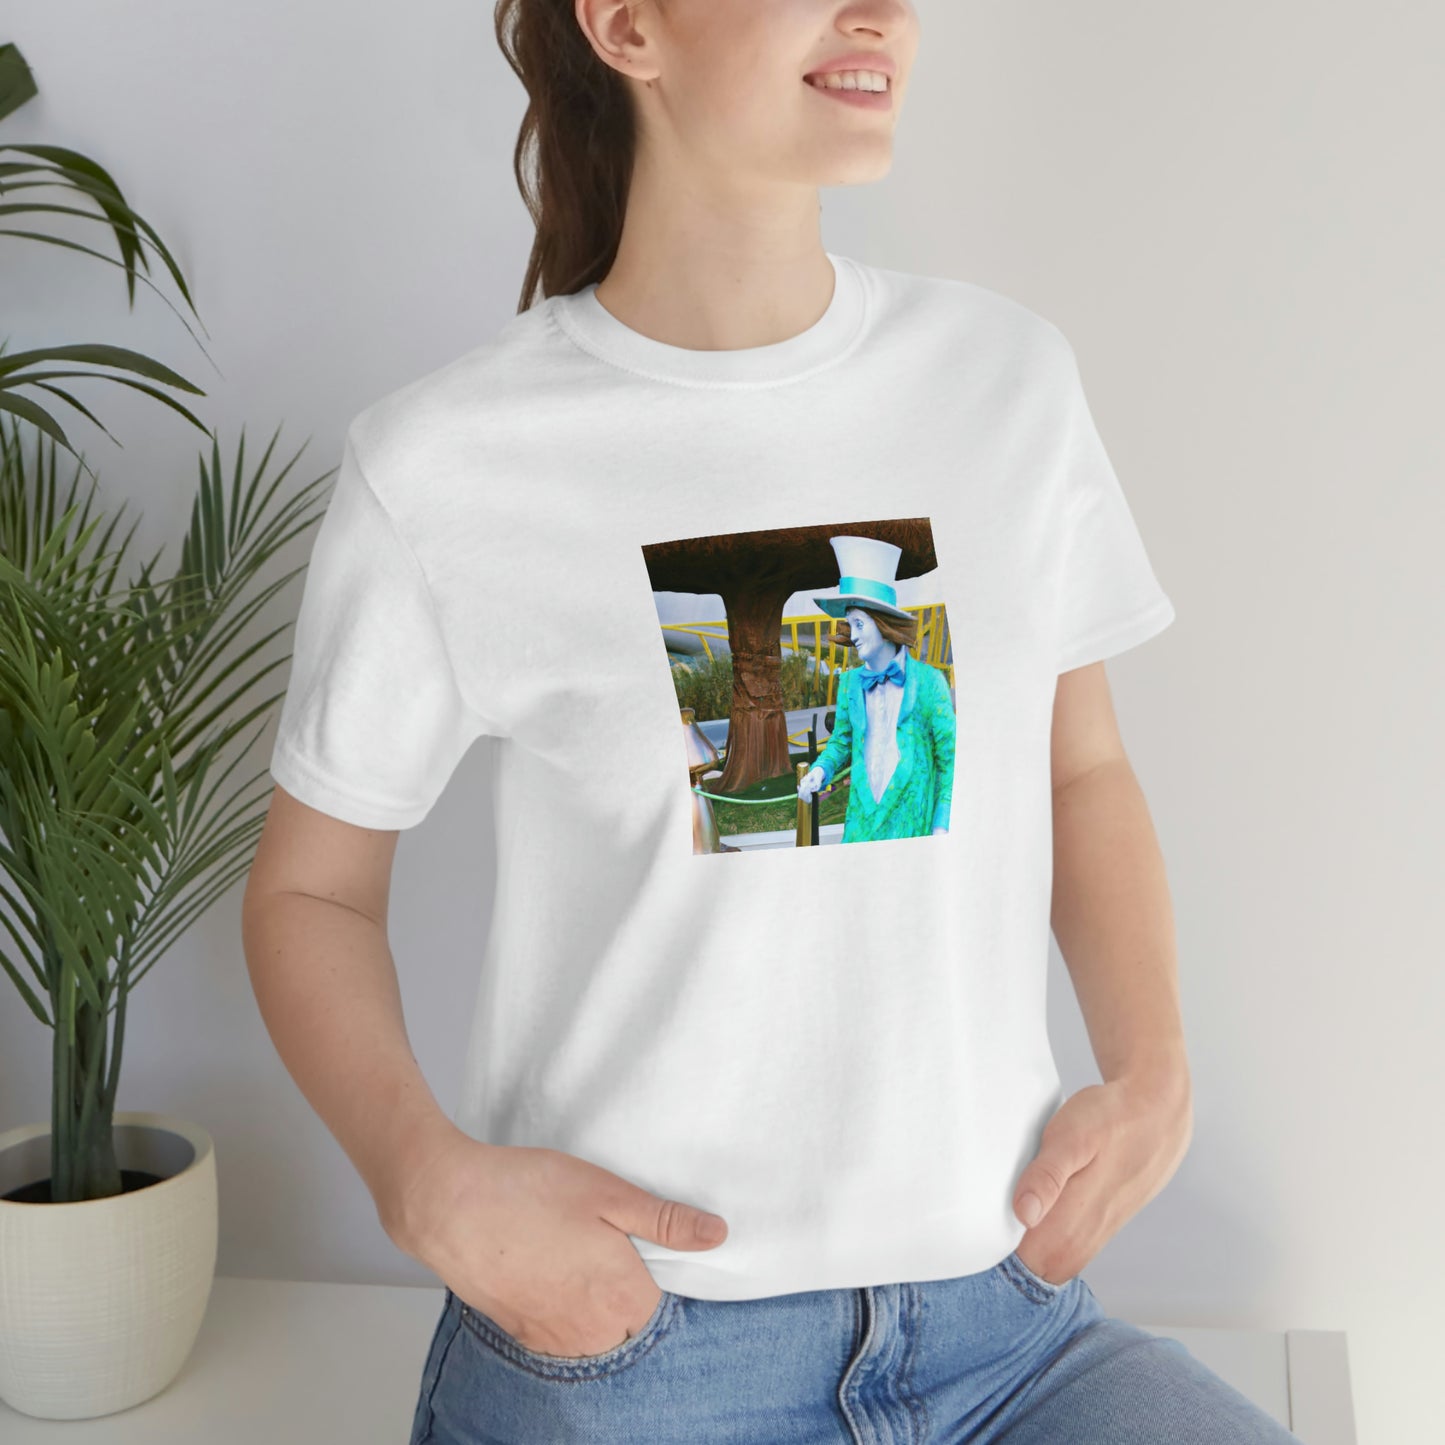 store

A-Chase in Cyberland - tshirt